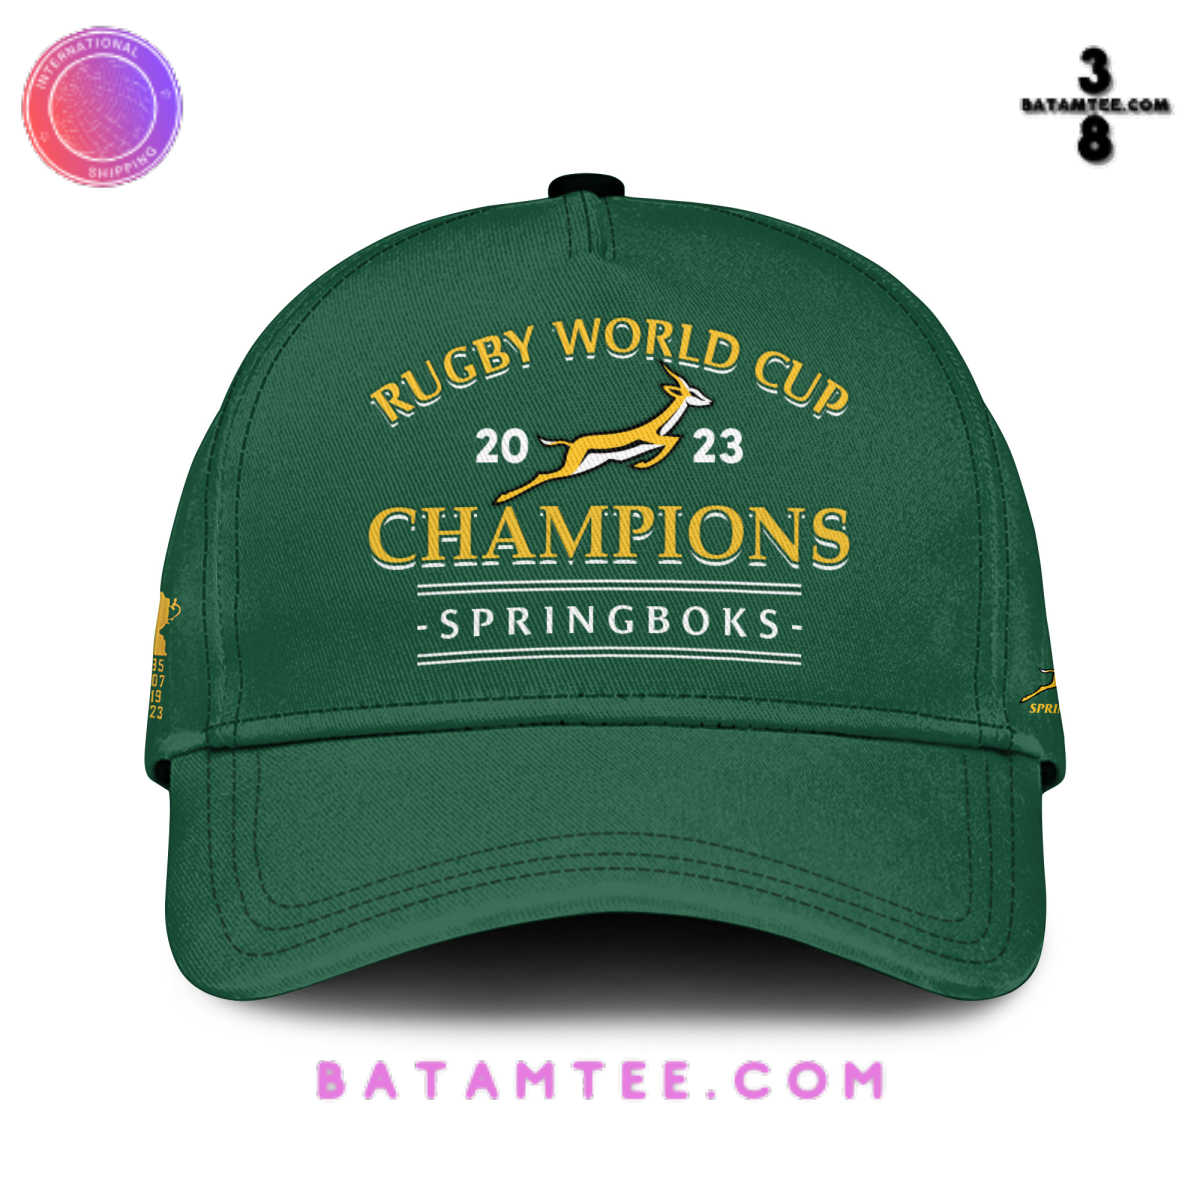 Buy it here: batamtee.com/product/spring…
Selling at only: 28.99
Congrats to the Springboks for becoming RWC Champions! Loving the new Classic Cap! #Springboks #RWCChampions #ClassicCap